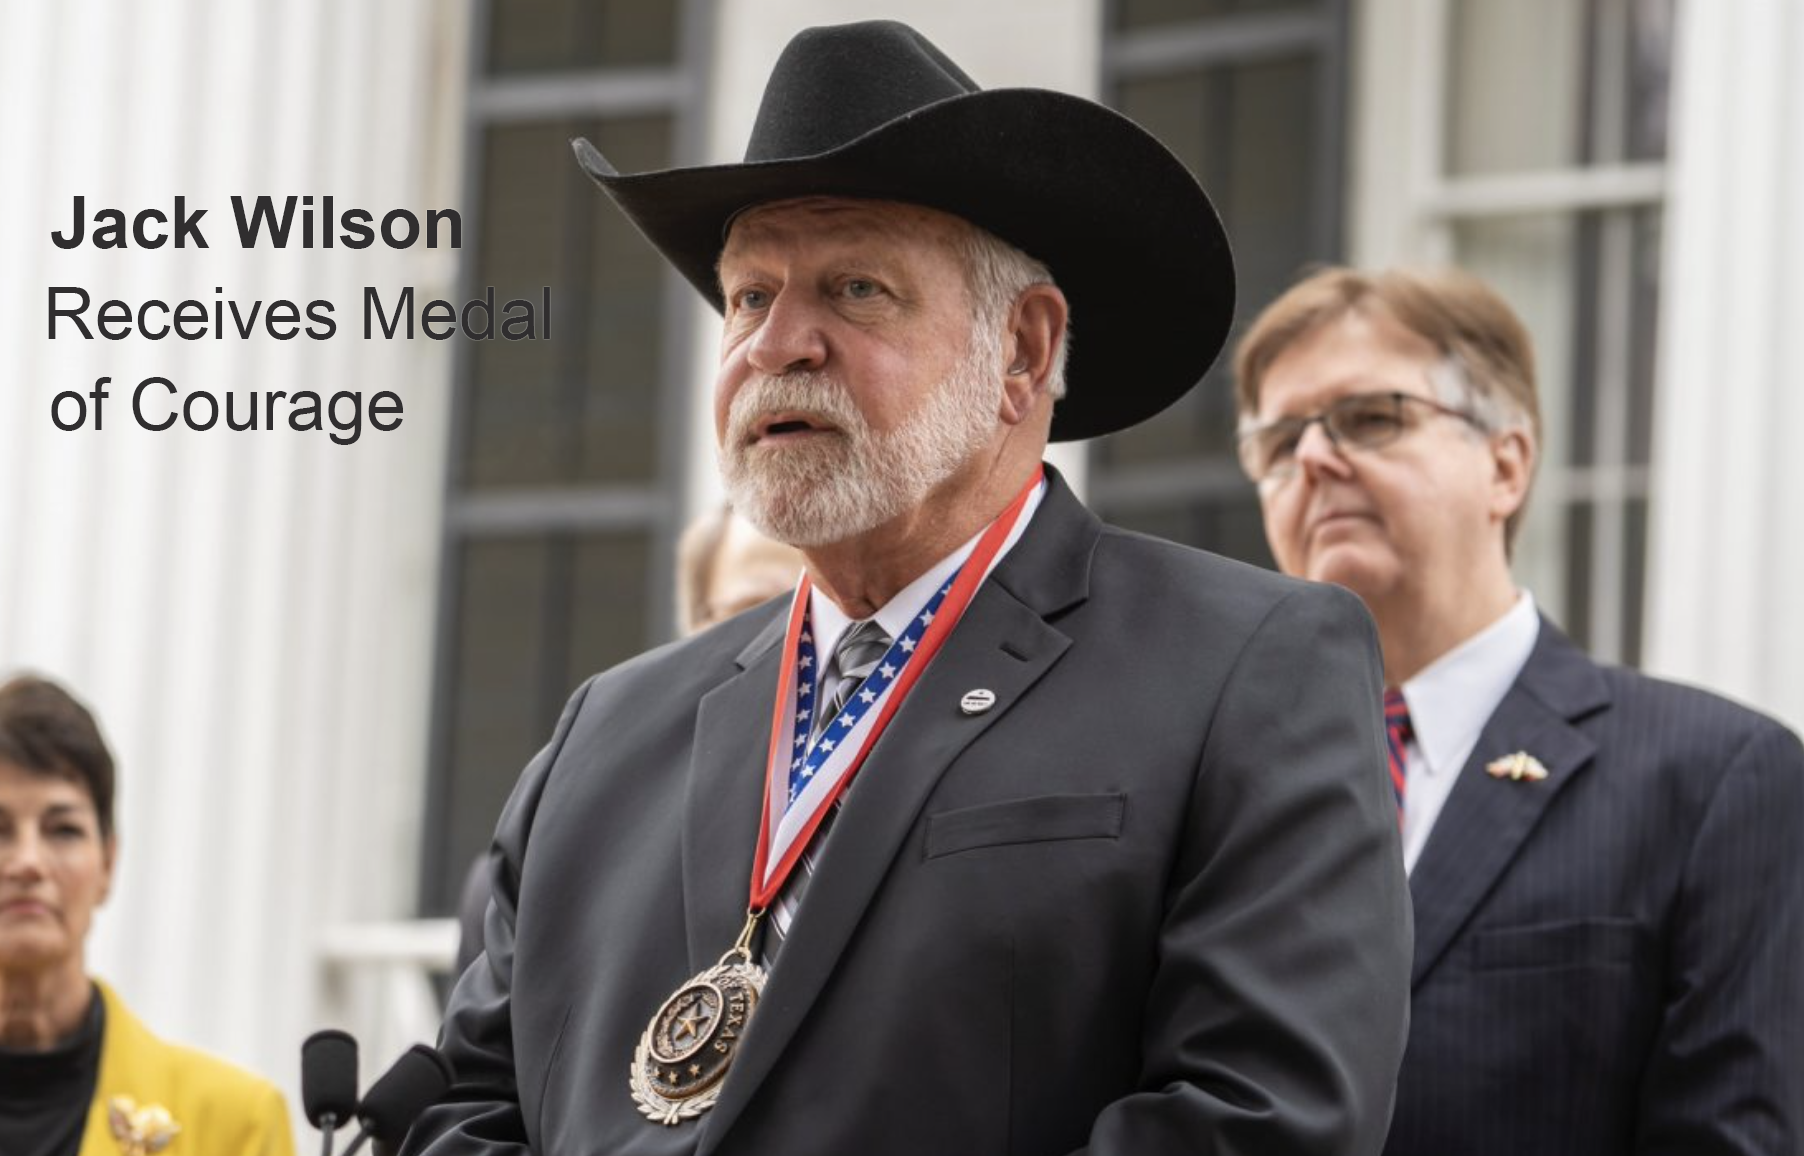 Jack Wilson receives Medal of Courage for stopping shooter